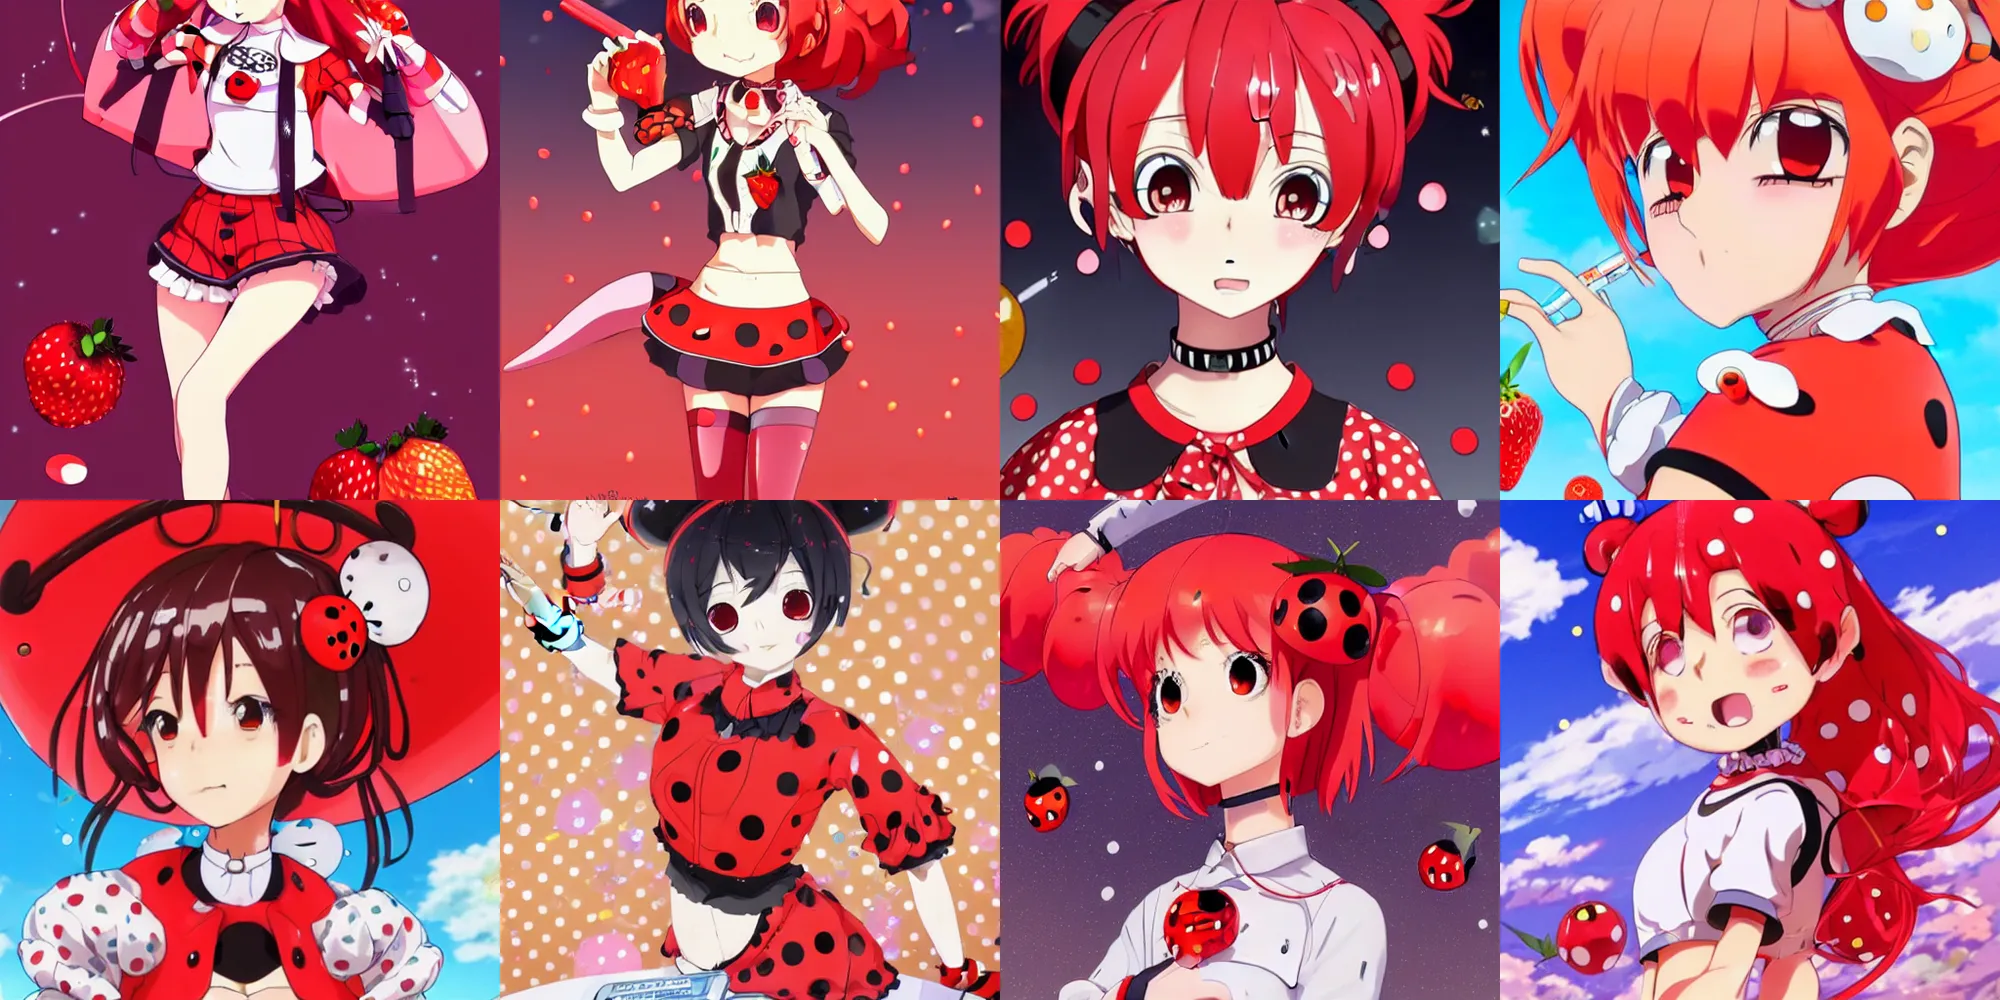 Prompt: anime key visual of a ladybug girl gijinka with red hair and space buns thick eyebrows and antennas wearing a red crop top with polkadots and a strawberry choker and a transparent coat sitting at a desk by ilya kuvshinov and peter paul rubens